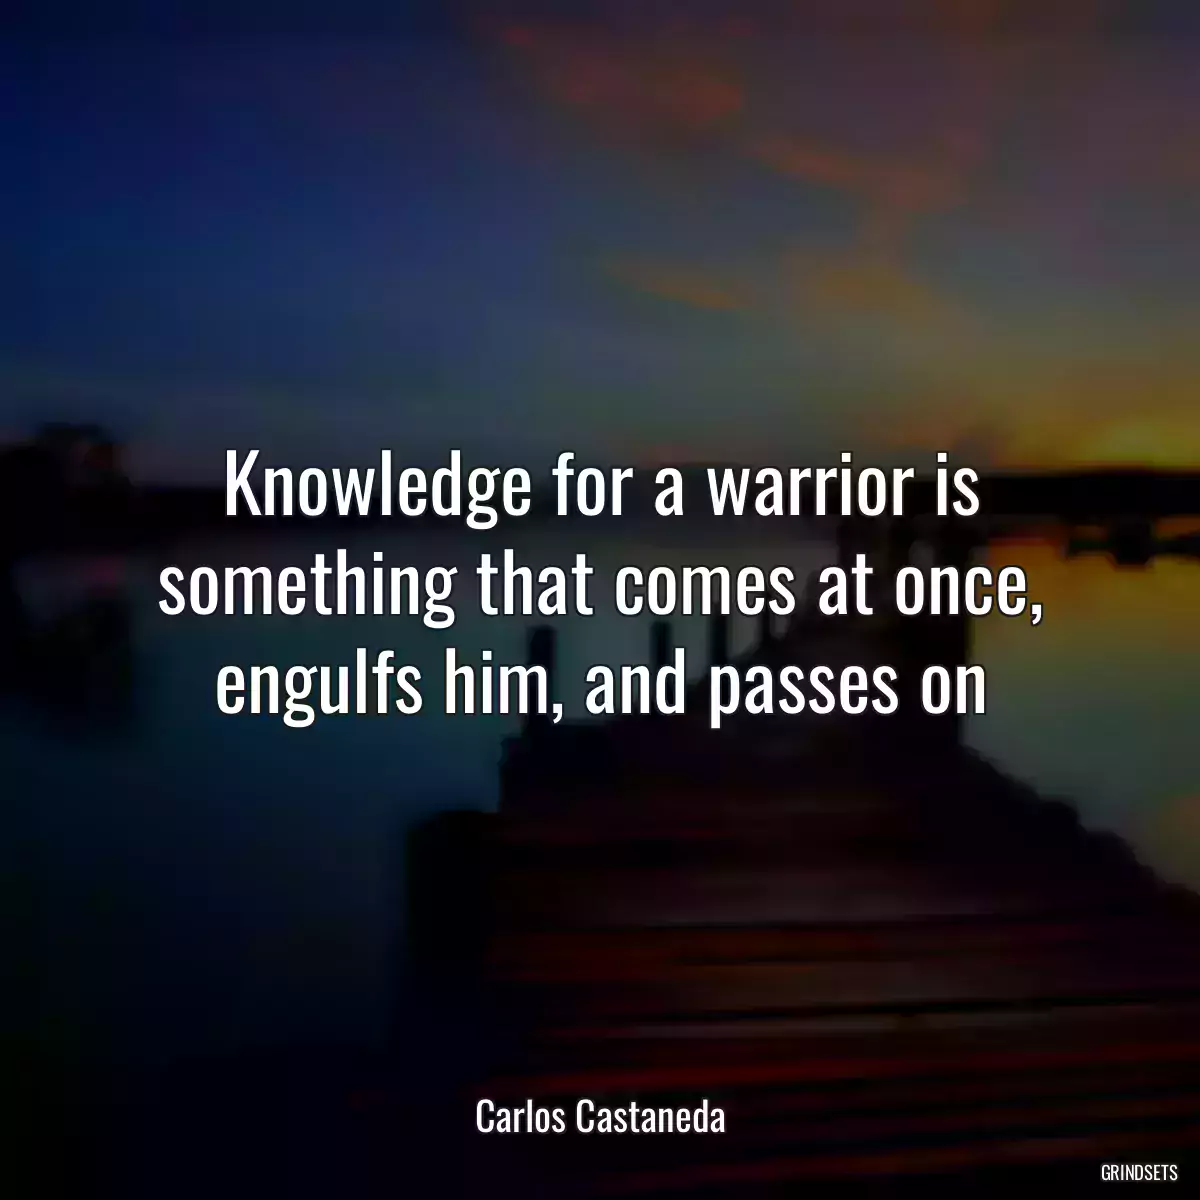 Knowledge for a warrior is something that comes at once, engulfs him, and passes on